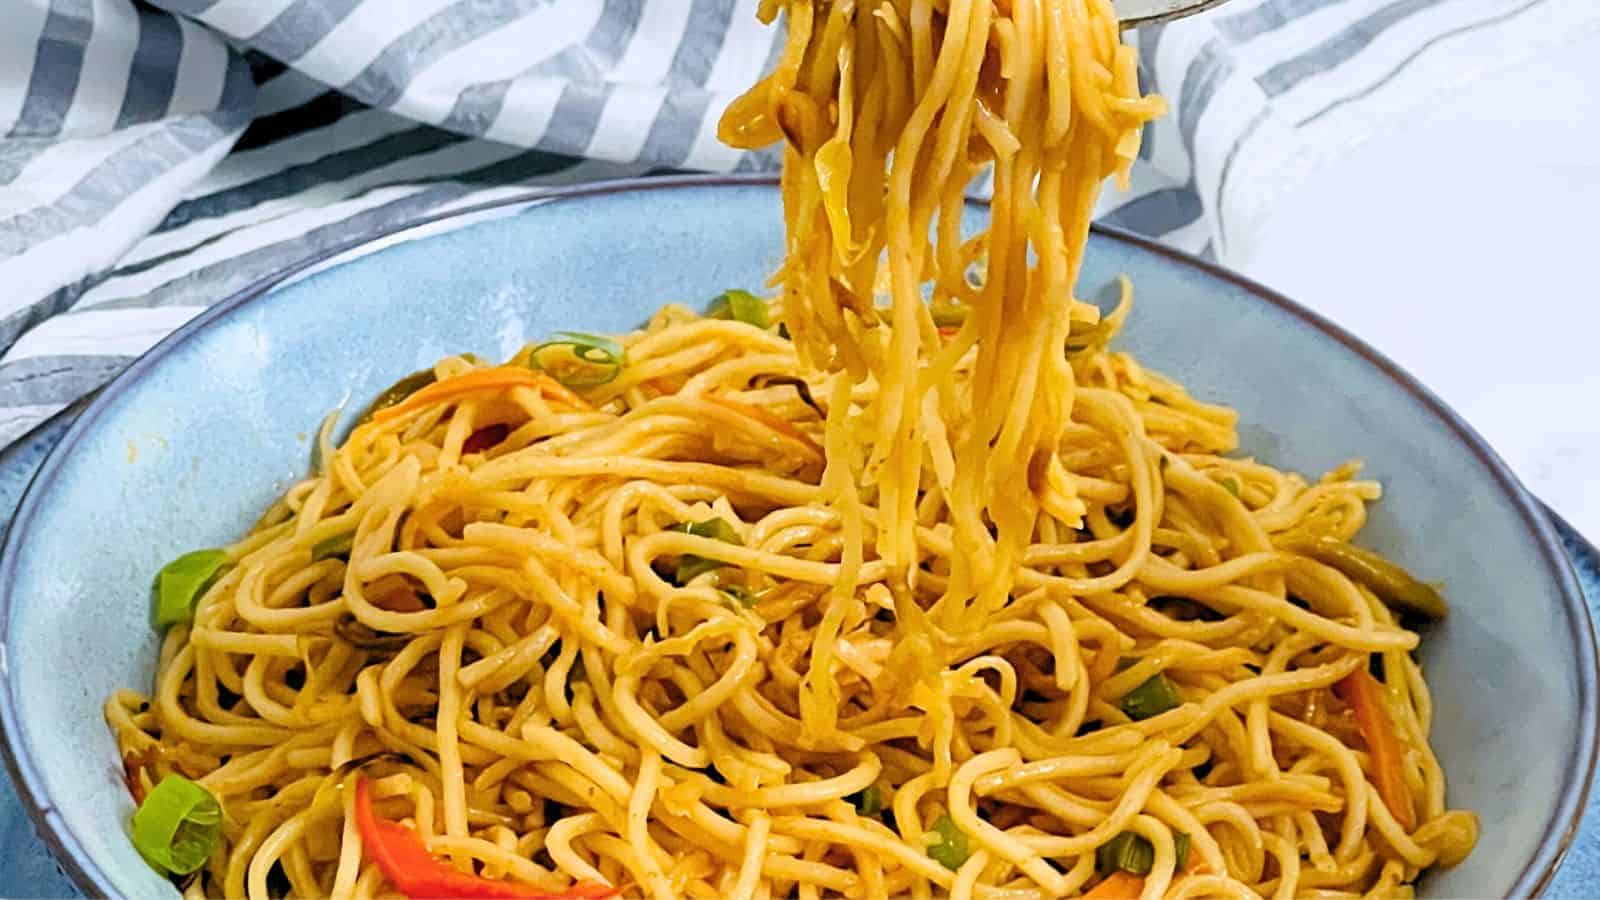 A bowl of Hakka Noodles with vegetables, a fork lifting some noodles, placed on a blue dish with a striped napkin on the side.